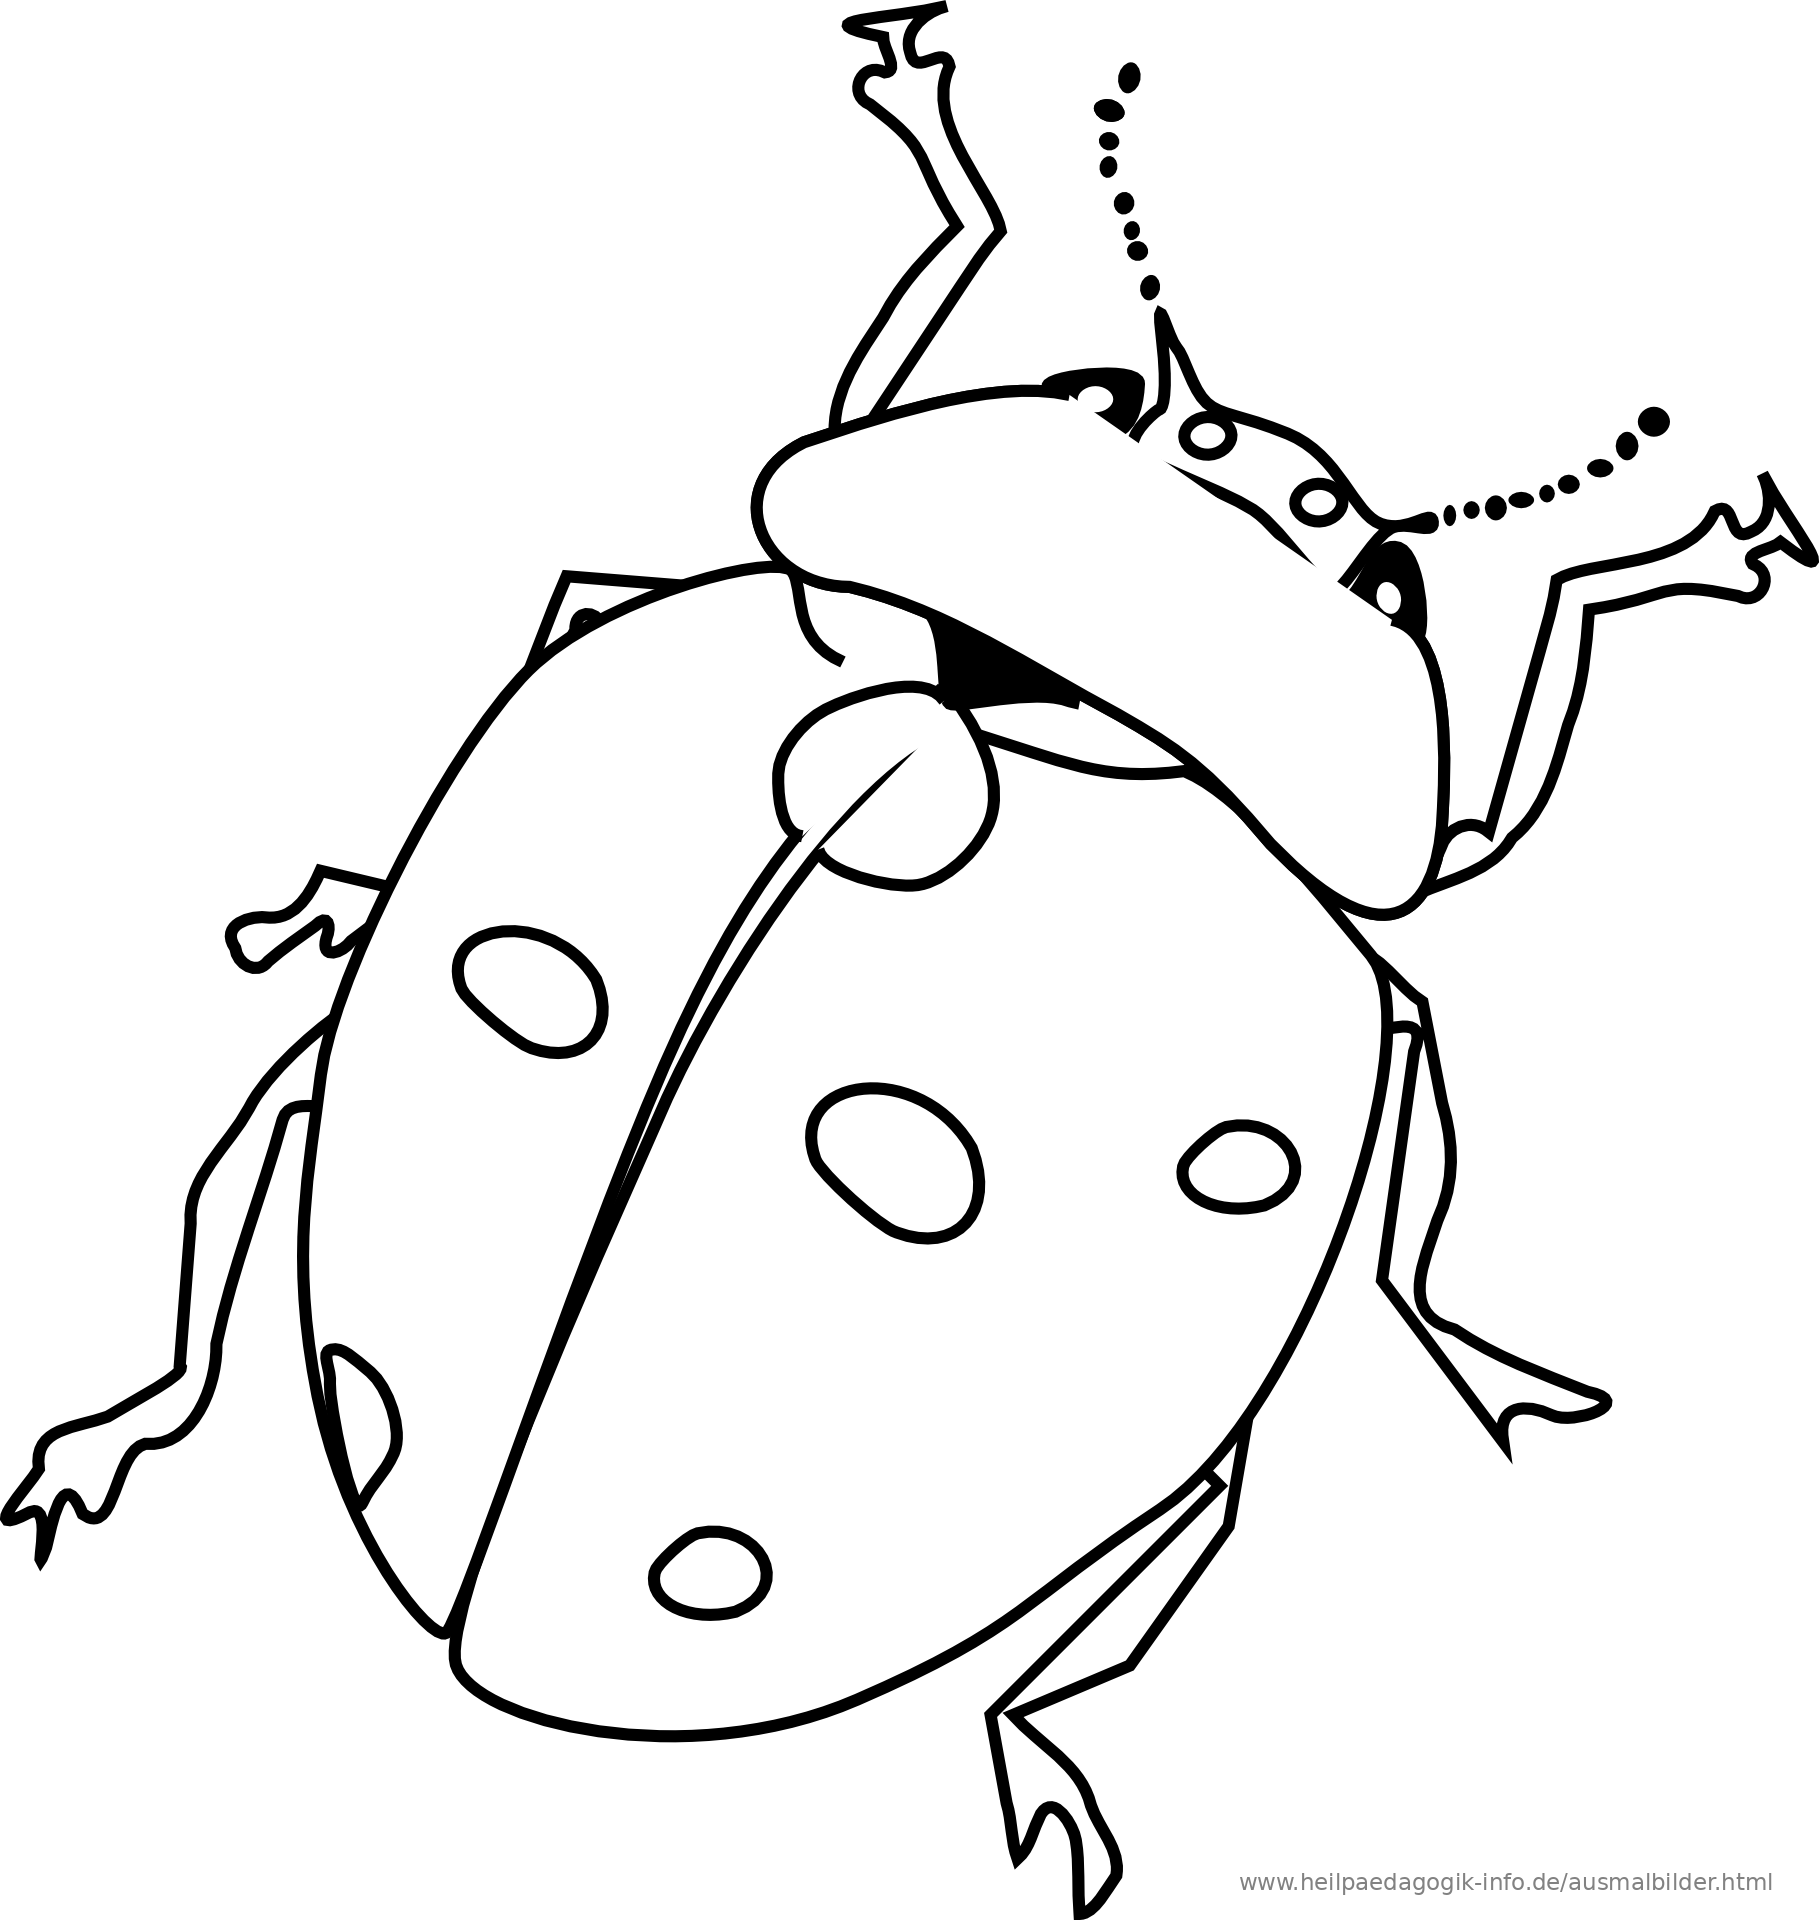 free black and white clip art bugs - photo #25